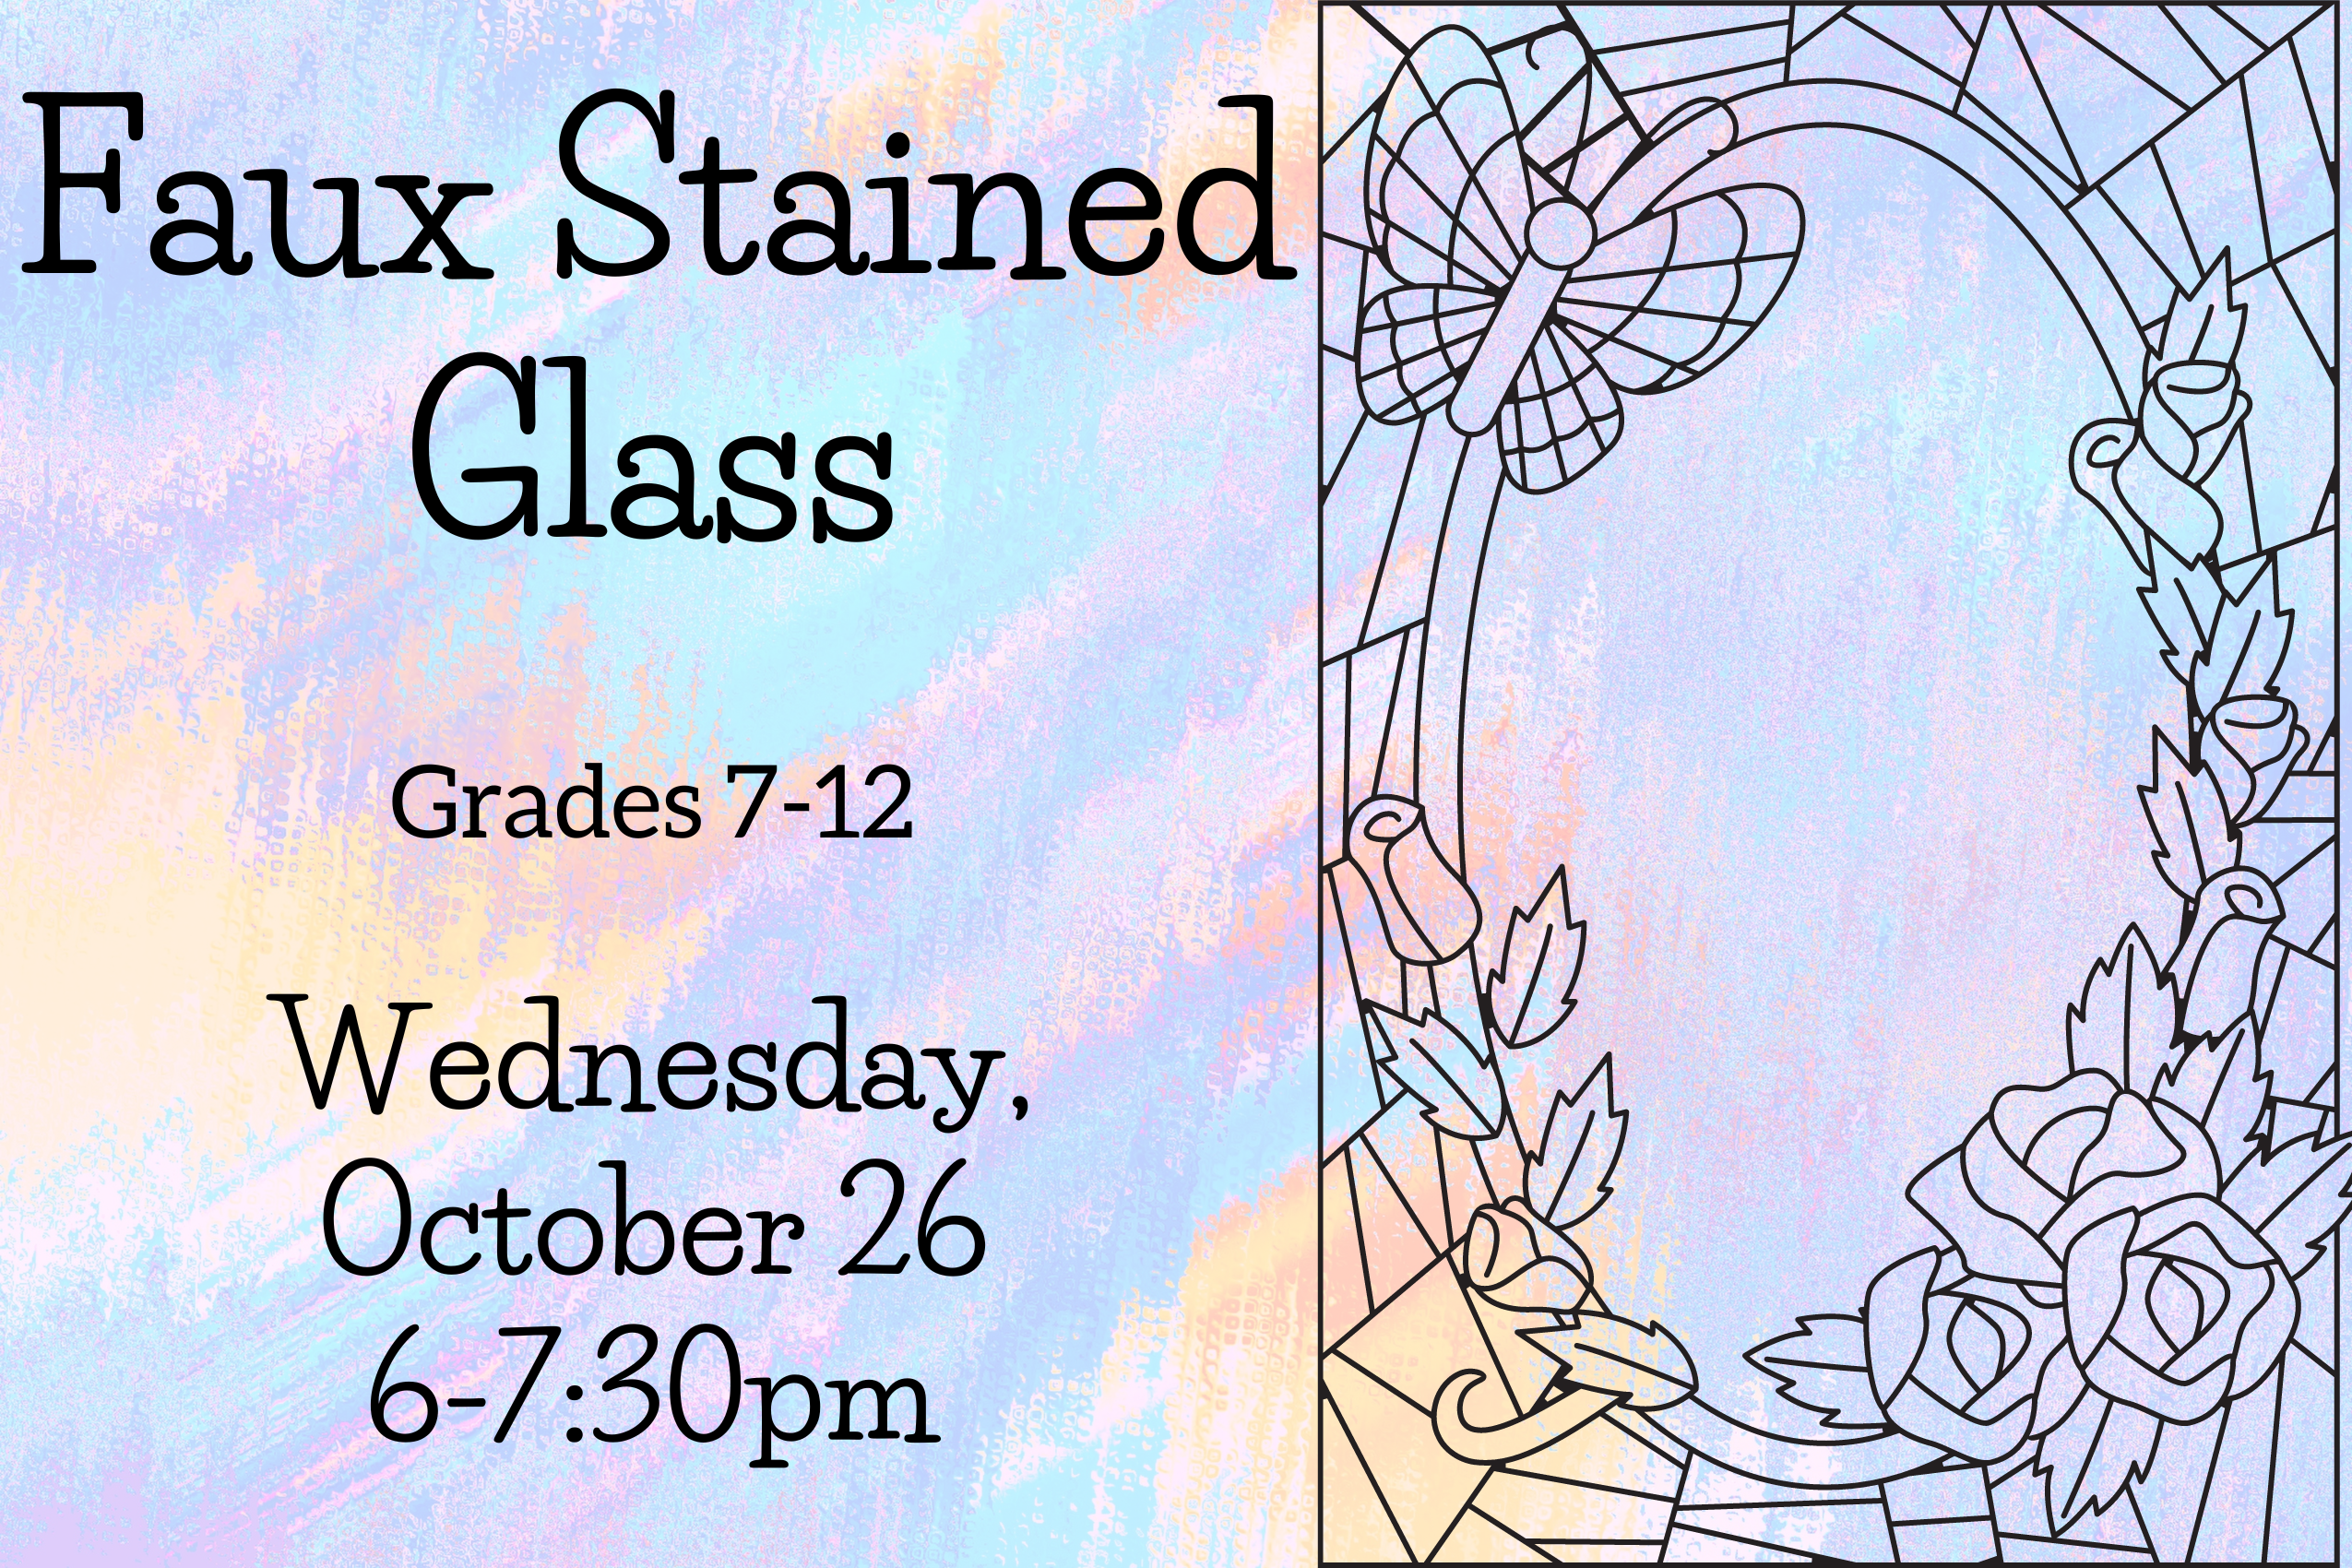 Program flyer with the following text, "Faux Stained Glass. Grades 7-12. Wednesday, October 26. 6:00-7:30pm."